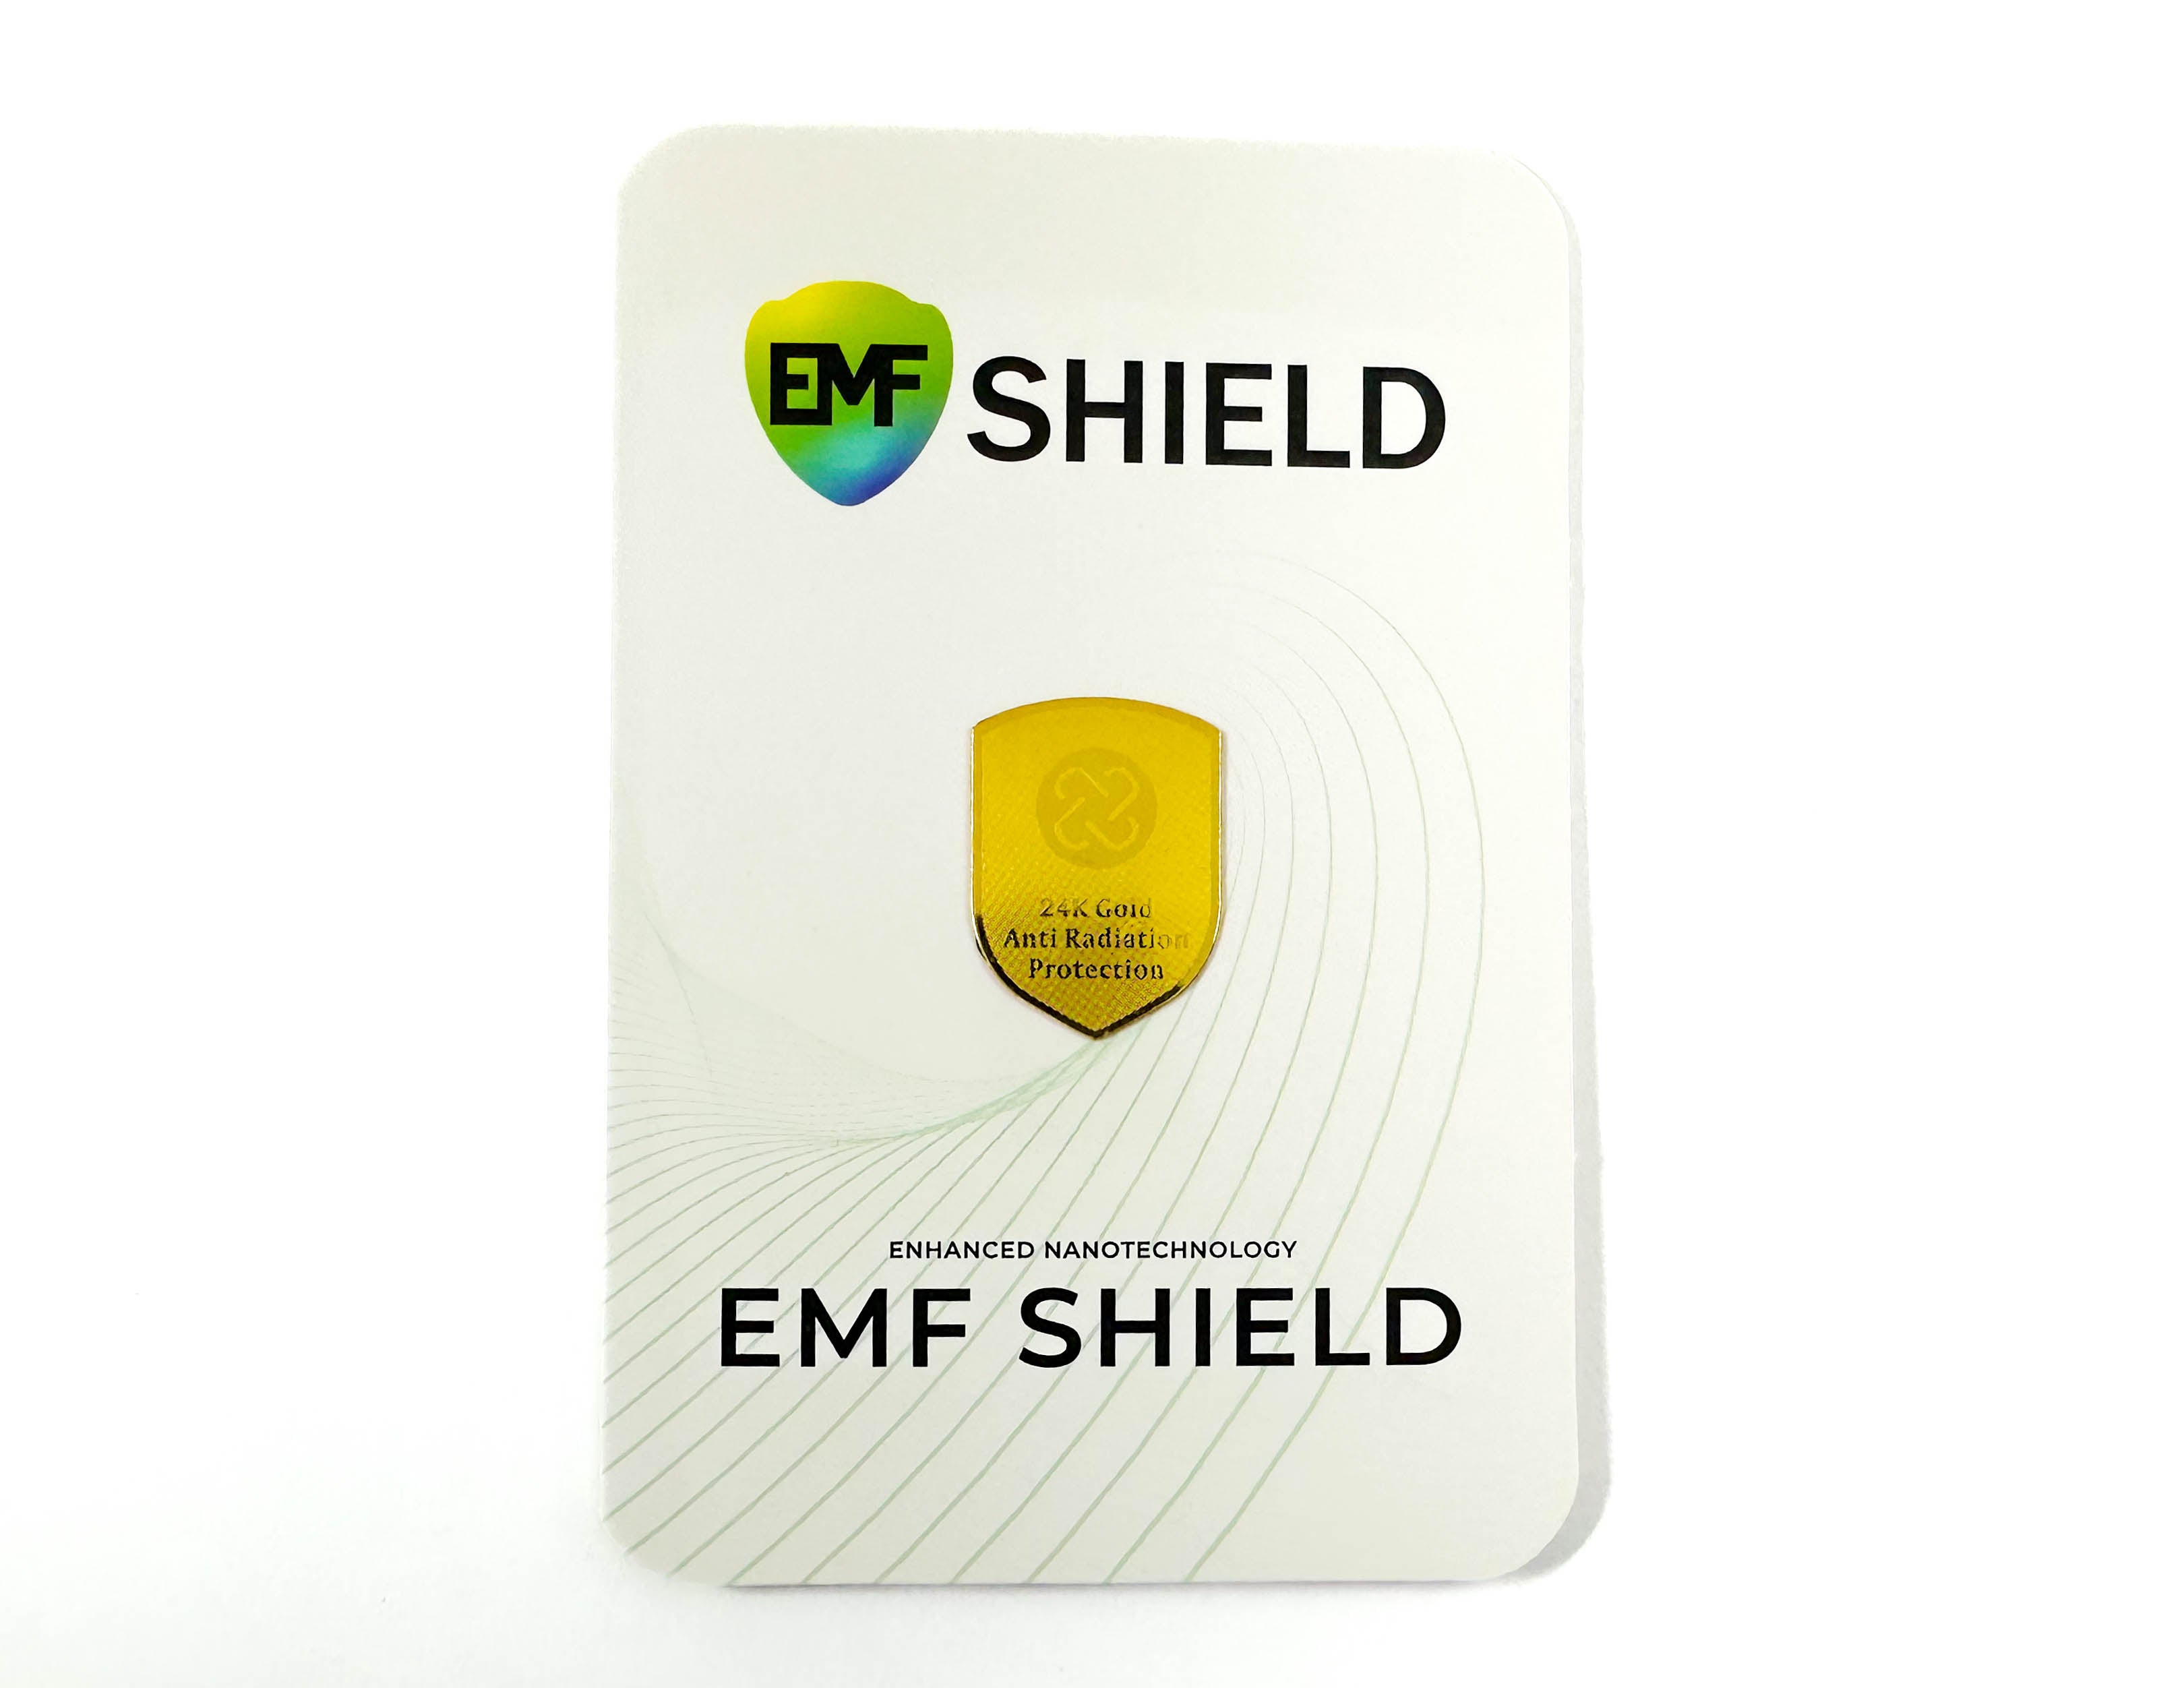 24k Gold EMF Defense Sticker for Phone and Electronics